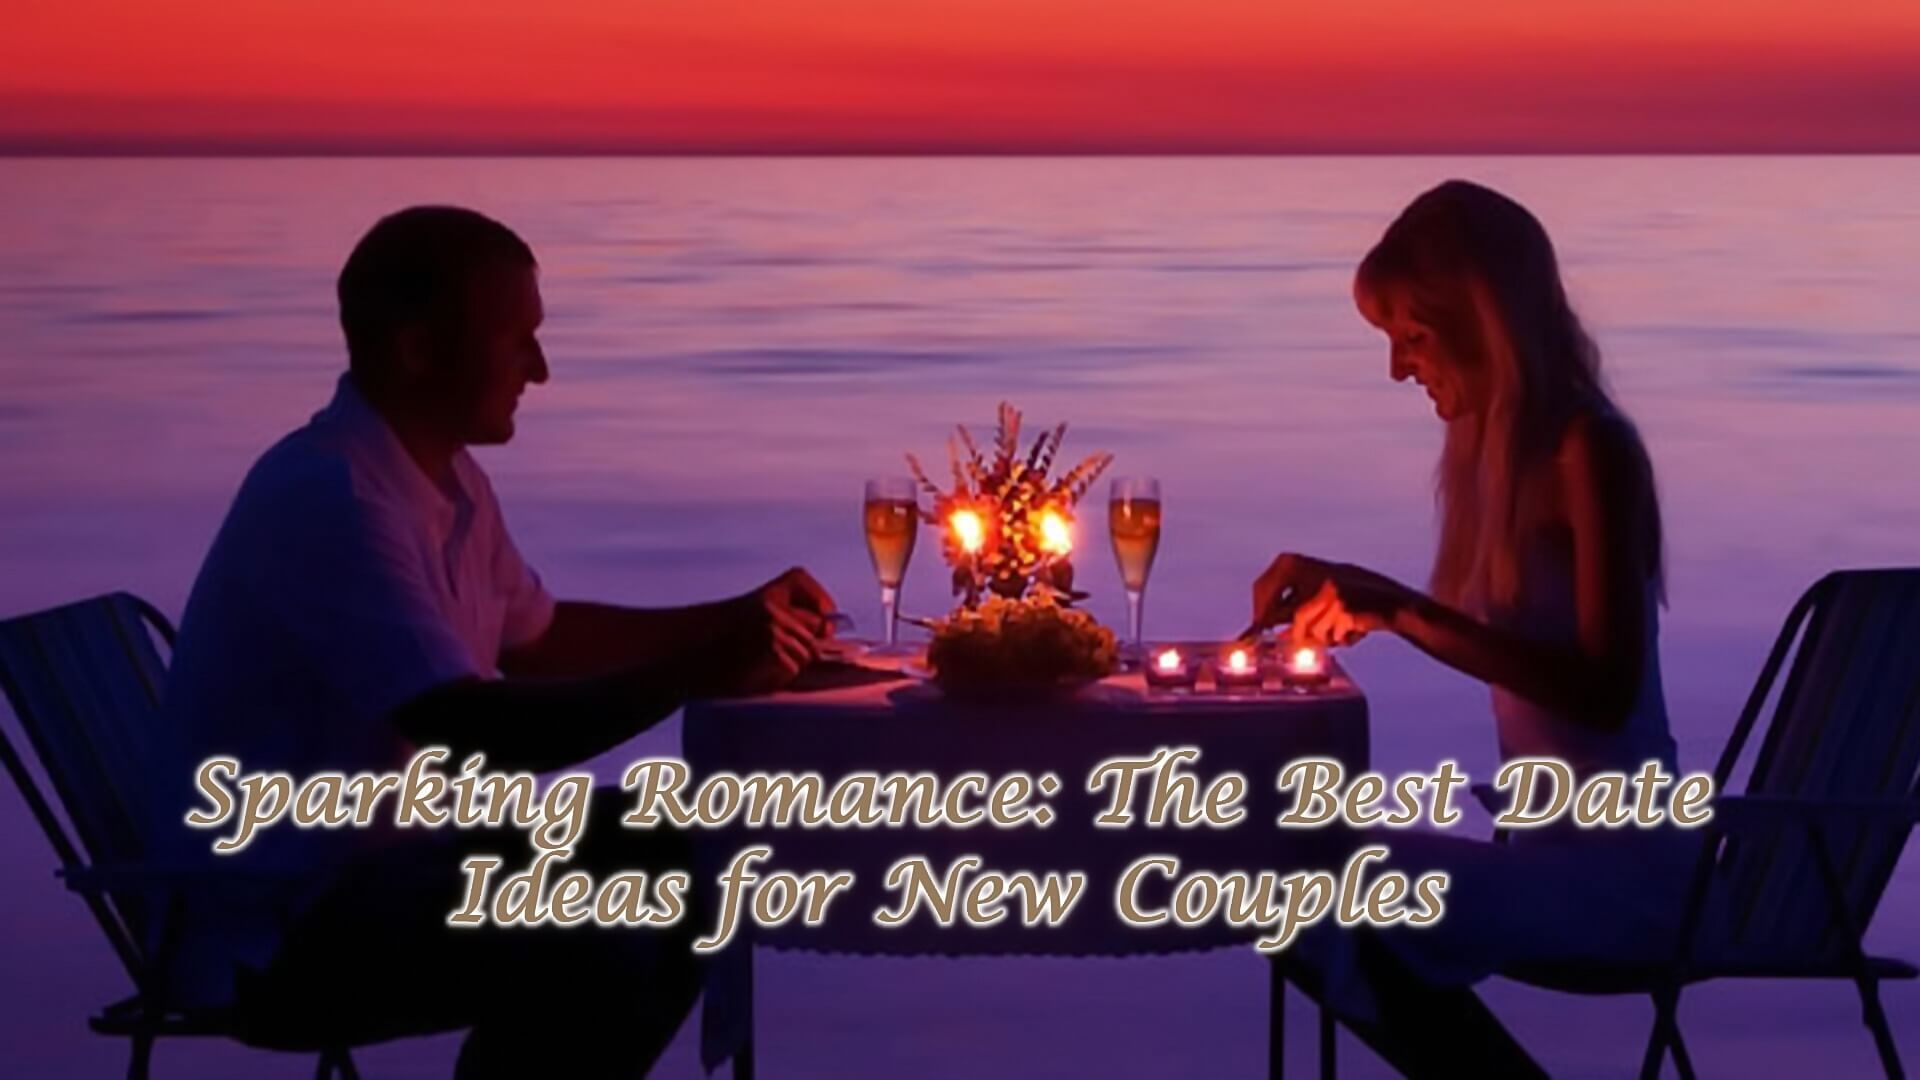 Sparking Romance: The Best Date Ideas for New Couples